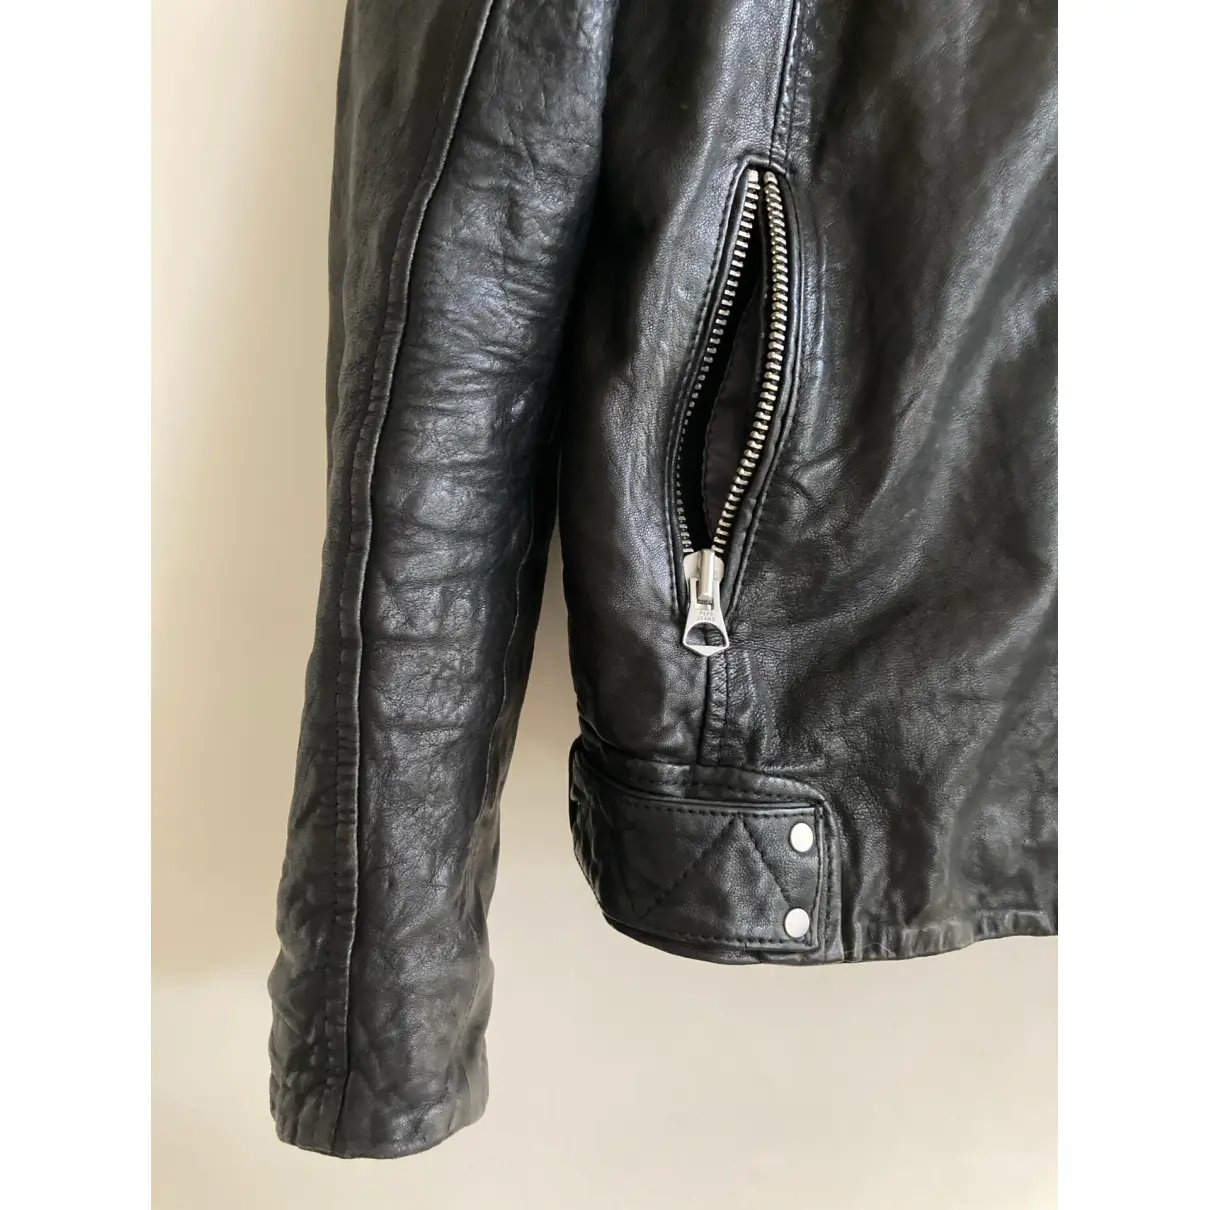 Buy PEPE JEANS Leather jacket online